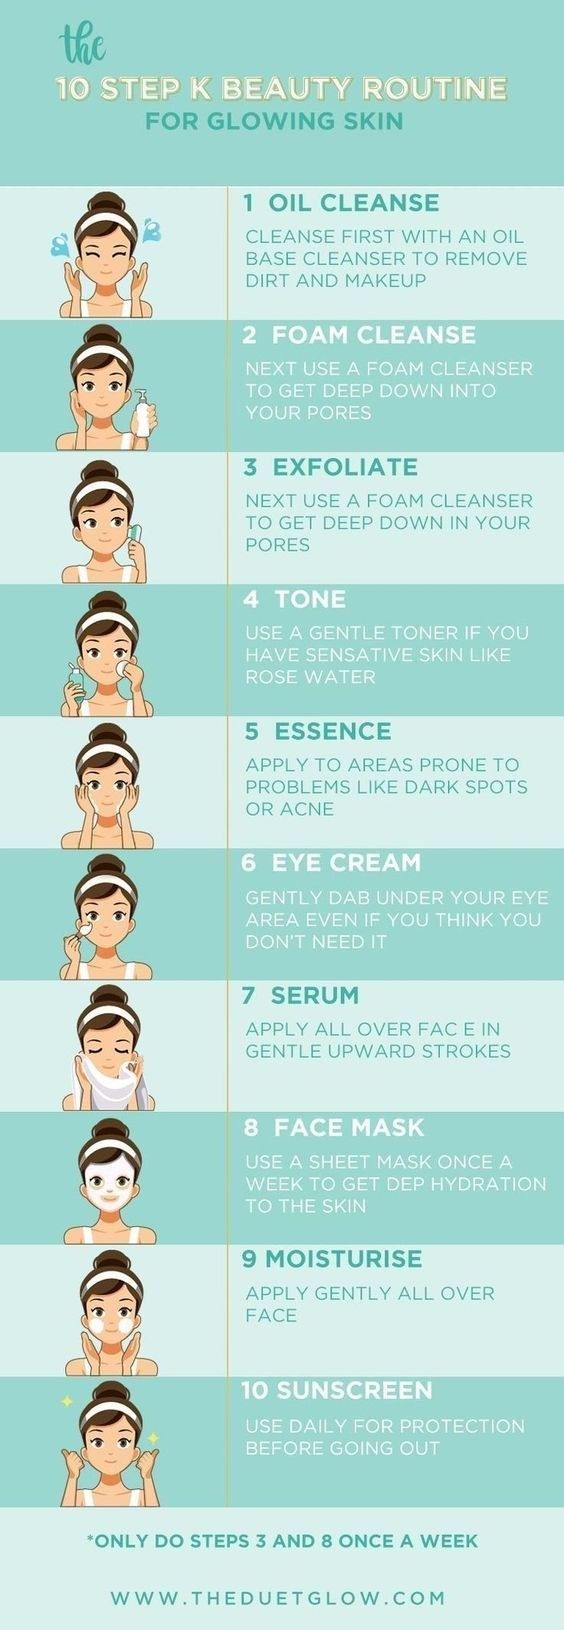 16 Skincare Cheat Sheets That Are Actually Useful - 16 Skincare Cheat Sheets That Are Actually Useful -   12 beauty care & skincare ideas